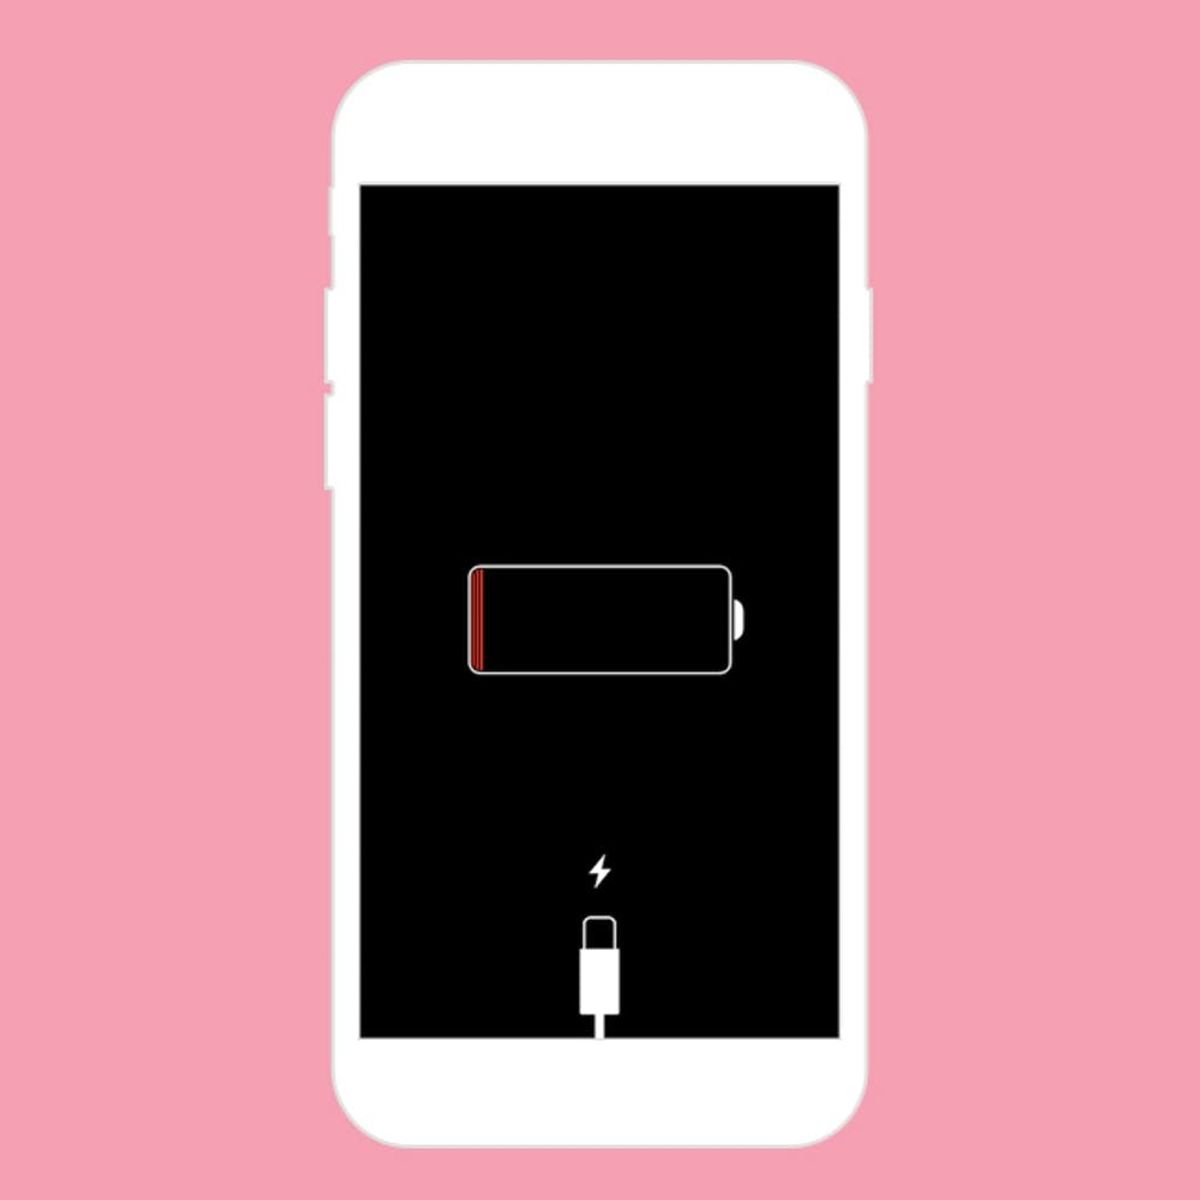 What You Don’t Know About Your iPhone’s Battery That Will Totally Save It